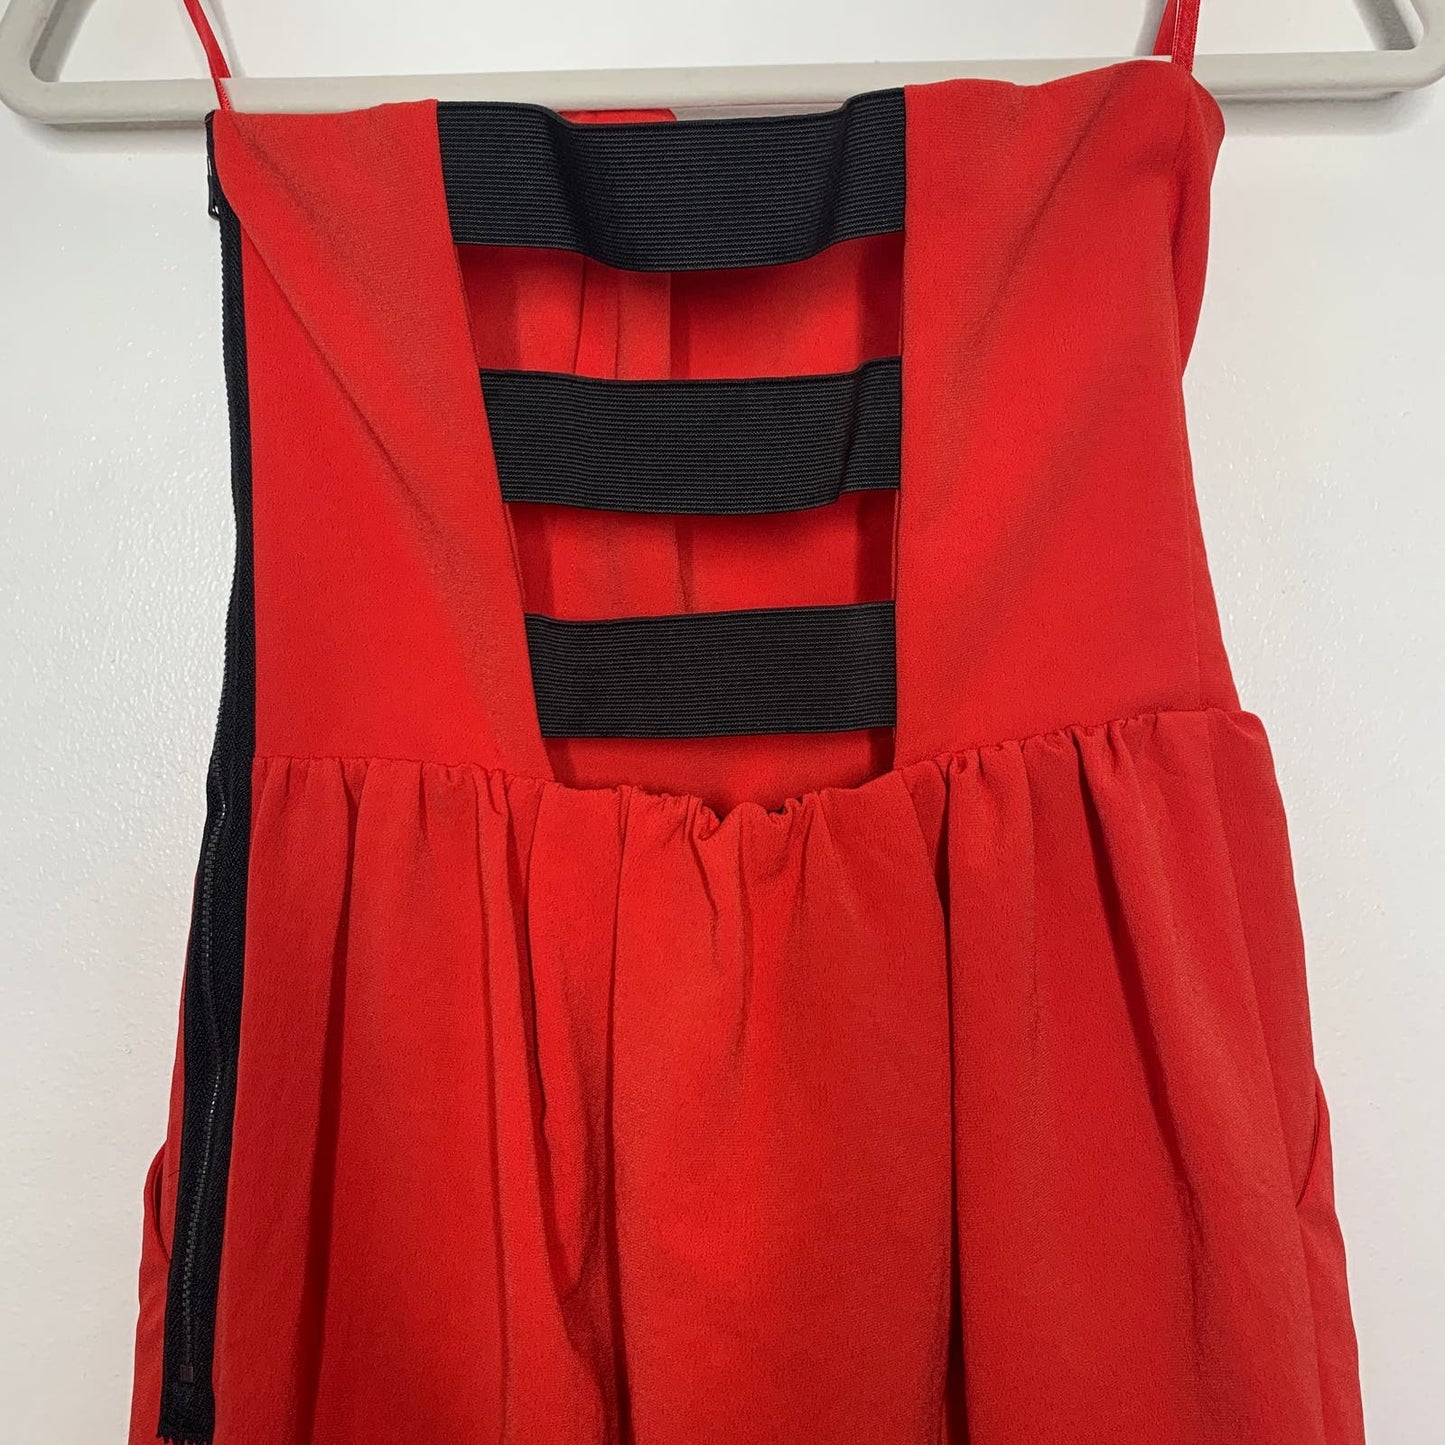 Red strapless sweetheart cocktail dress SZ 2